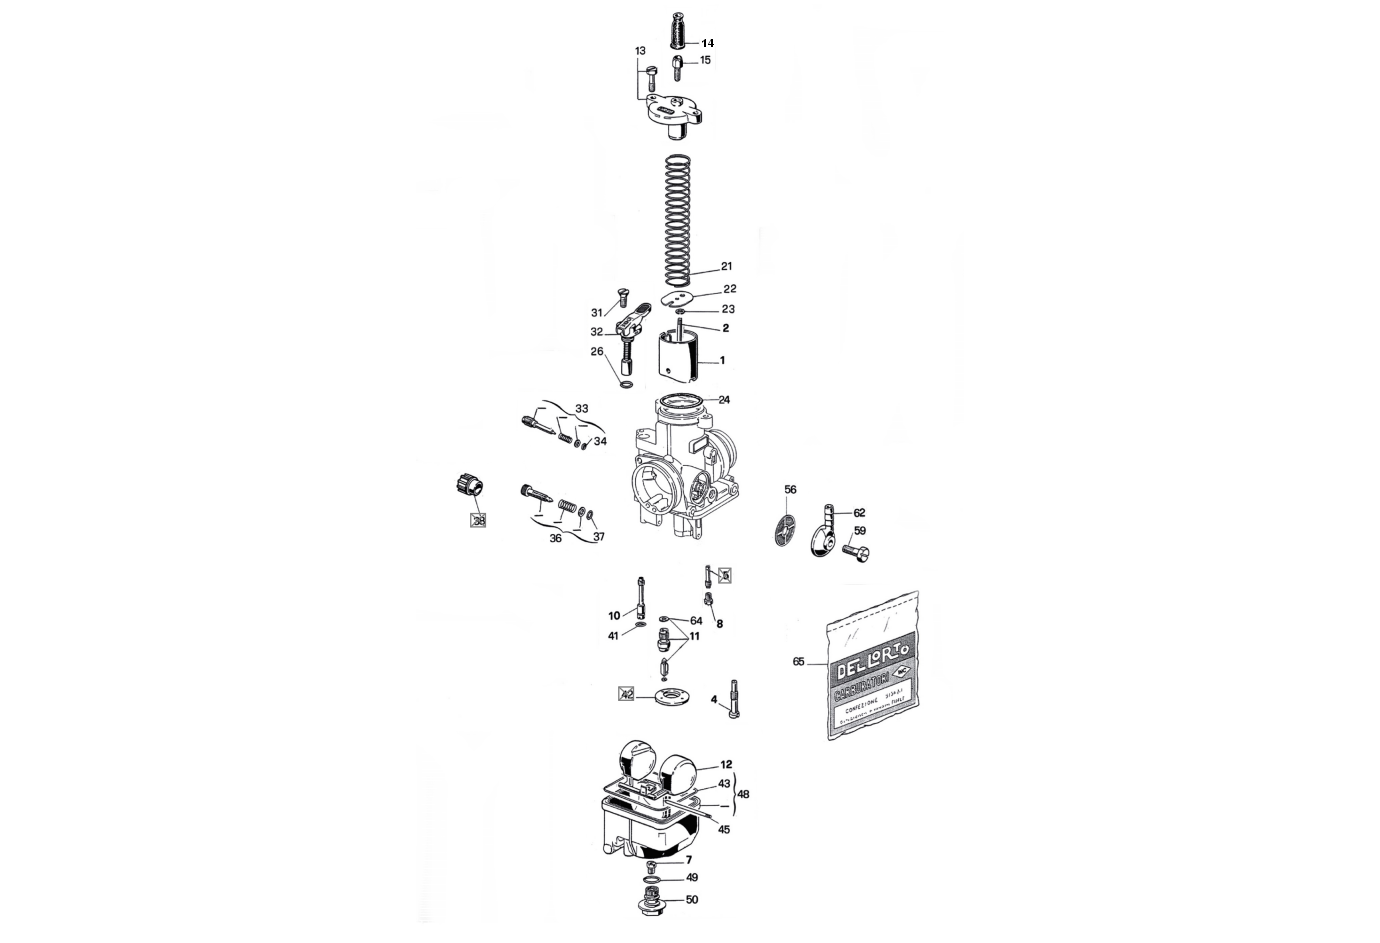 Exploded view Vergaserteile Dell'orto PHBH 28 BS (Cod. 3302)